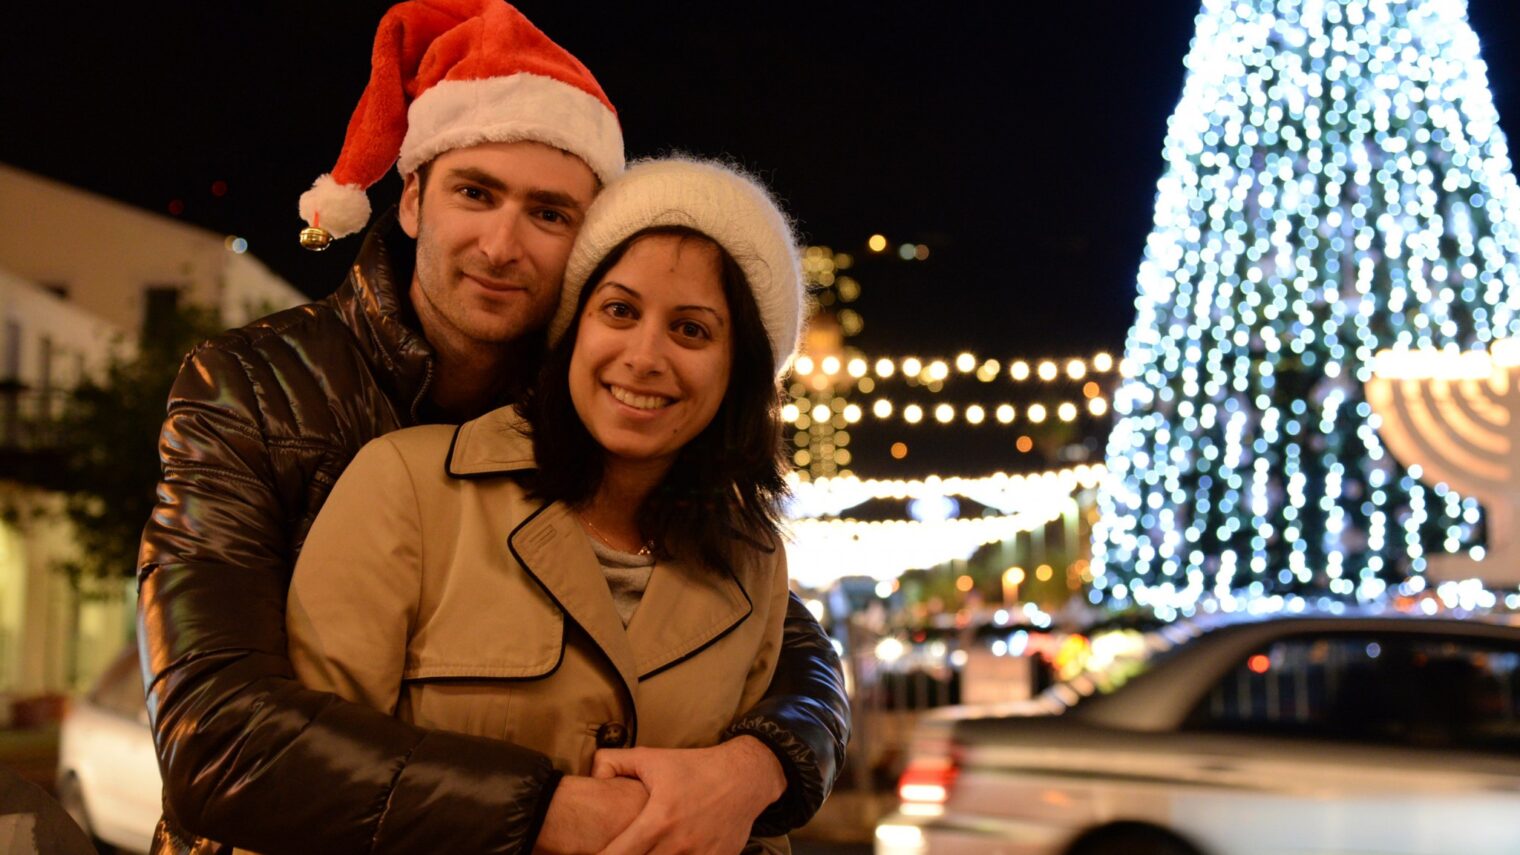 A couple gets into the Christmas spirit in the German Colony district of the northern Israeli city of Haifa. Photo by Sapir BronzbergFLASH90